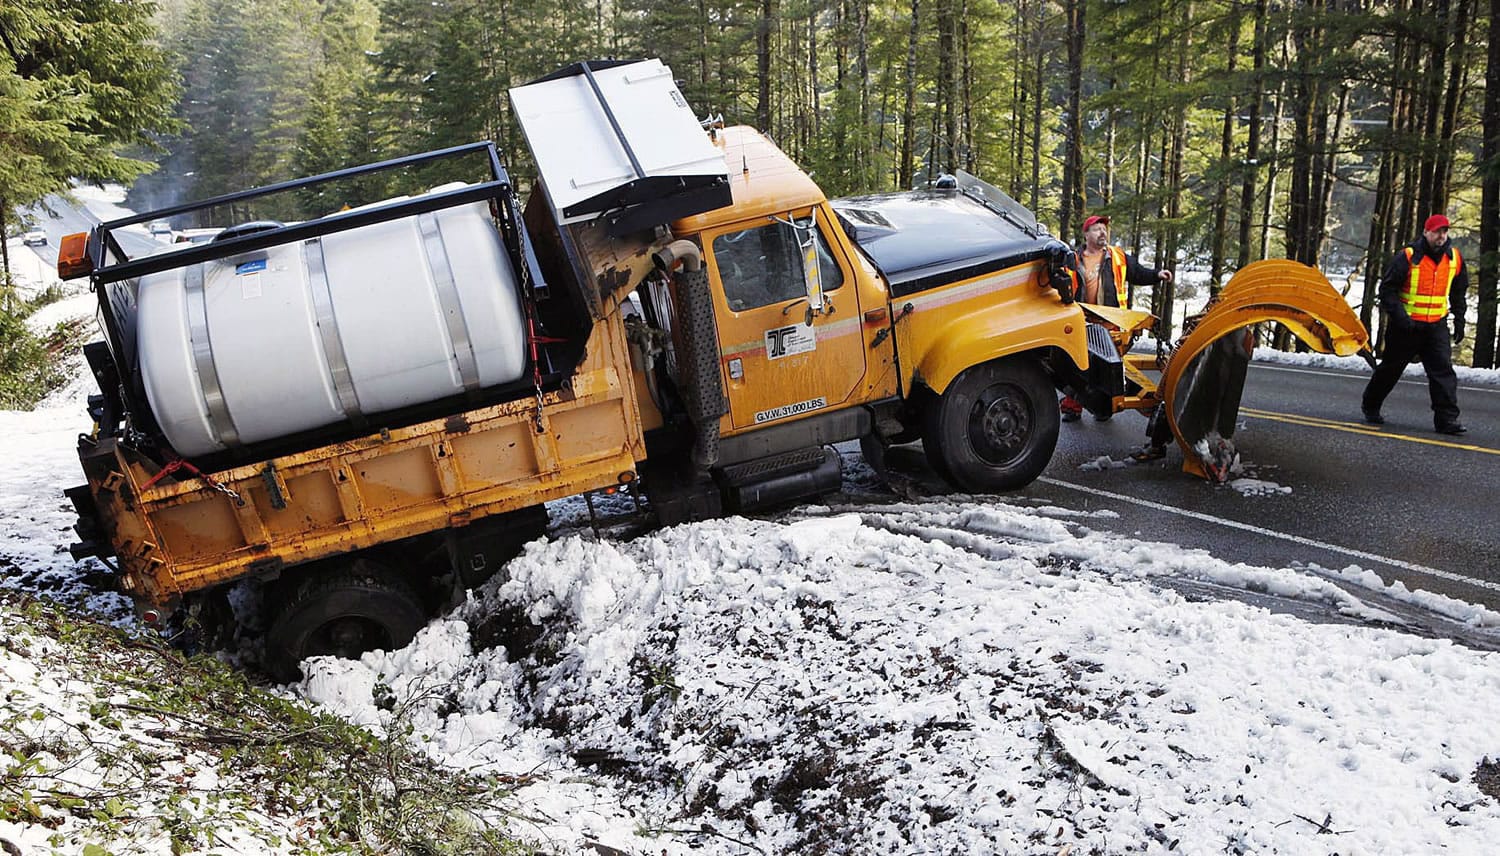 An Oregon Department of Transportation snow plow got stuck in a ditch on U.S. Highway 101 in Coos County, Ore., on Tuesday.